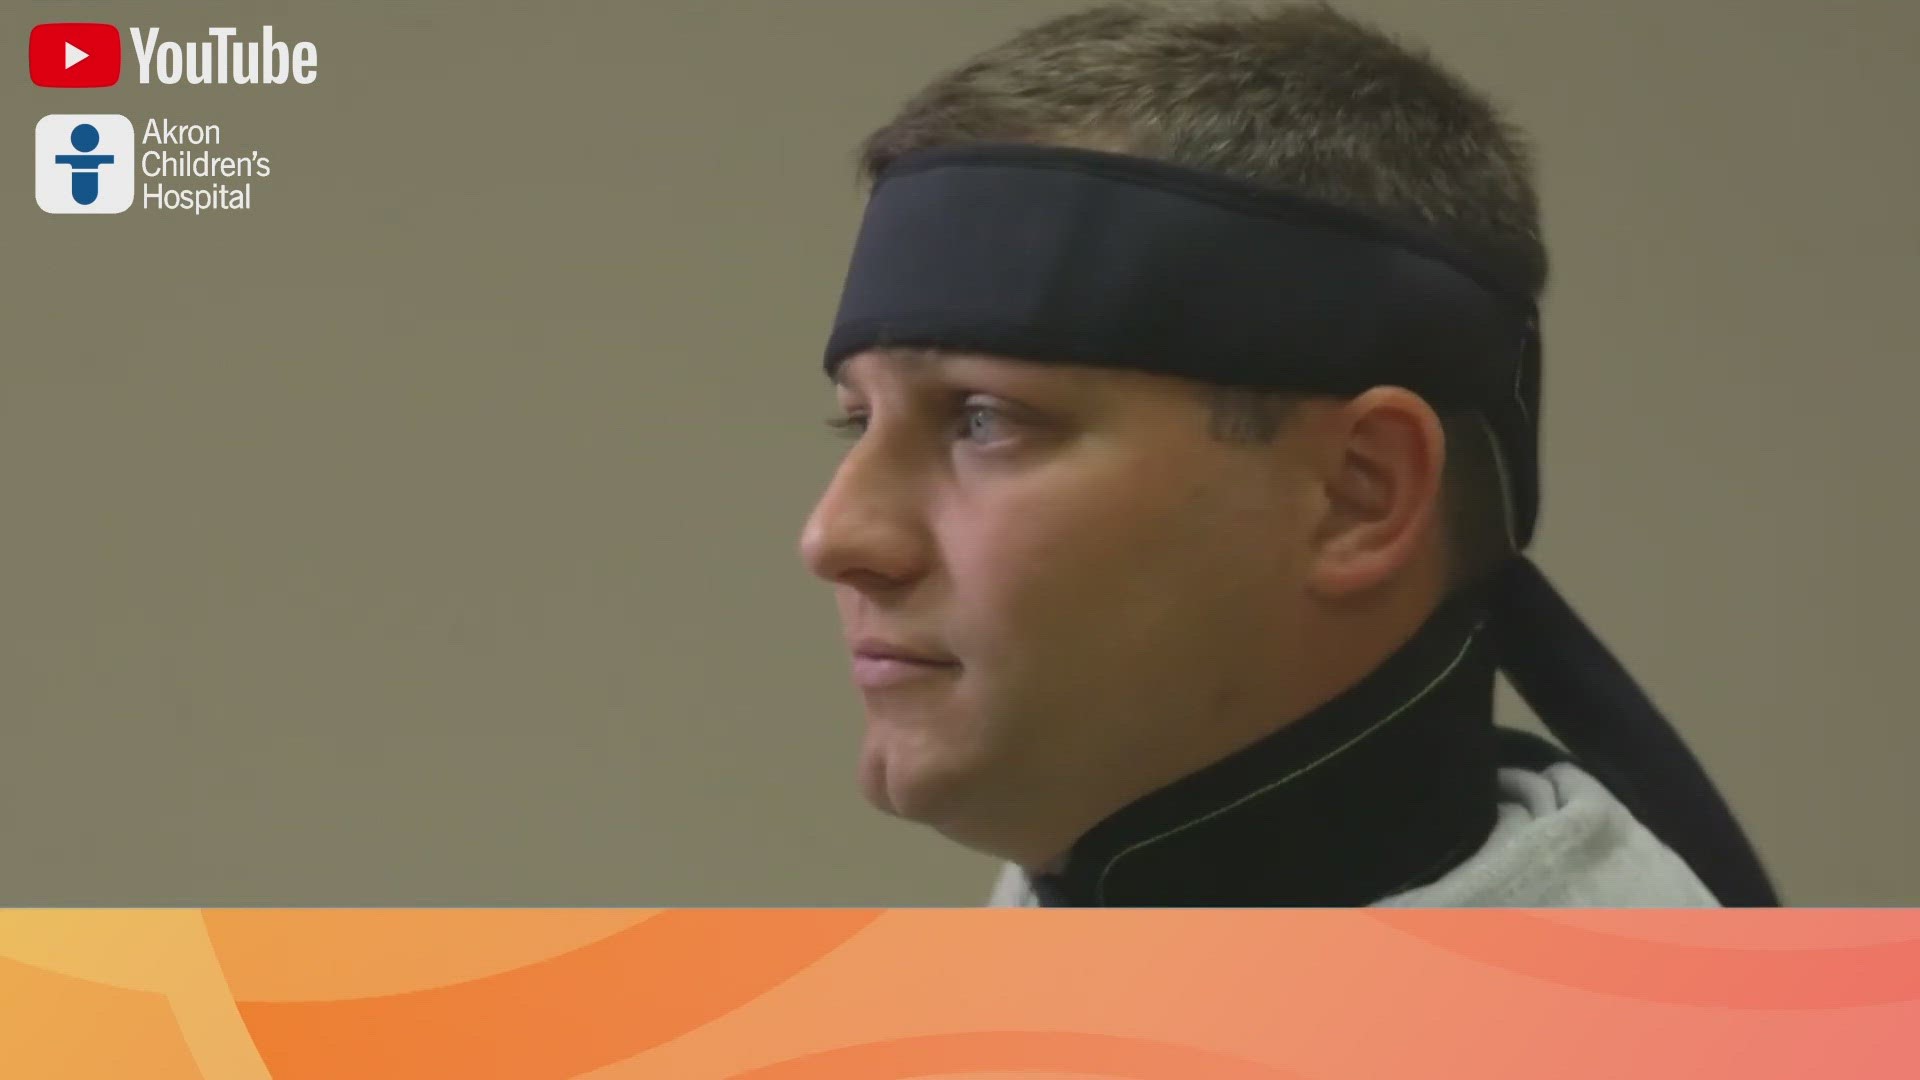 The study found cooling the brain might be a valuable tactic in preventing long-lasting concussion symptoms.